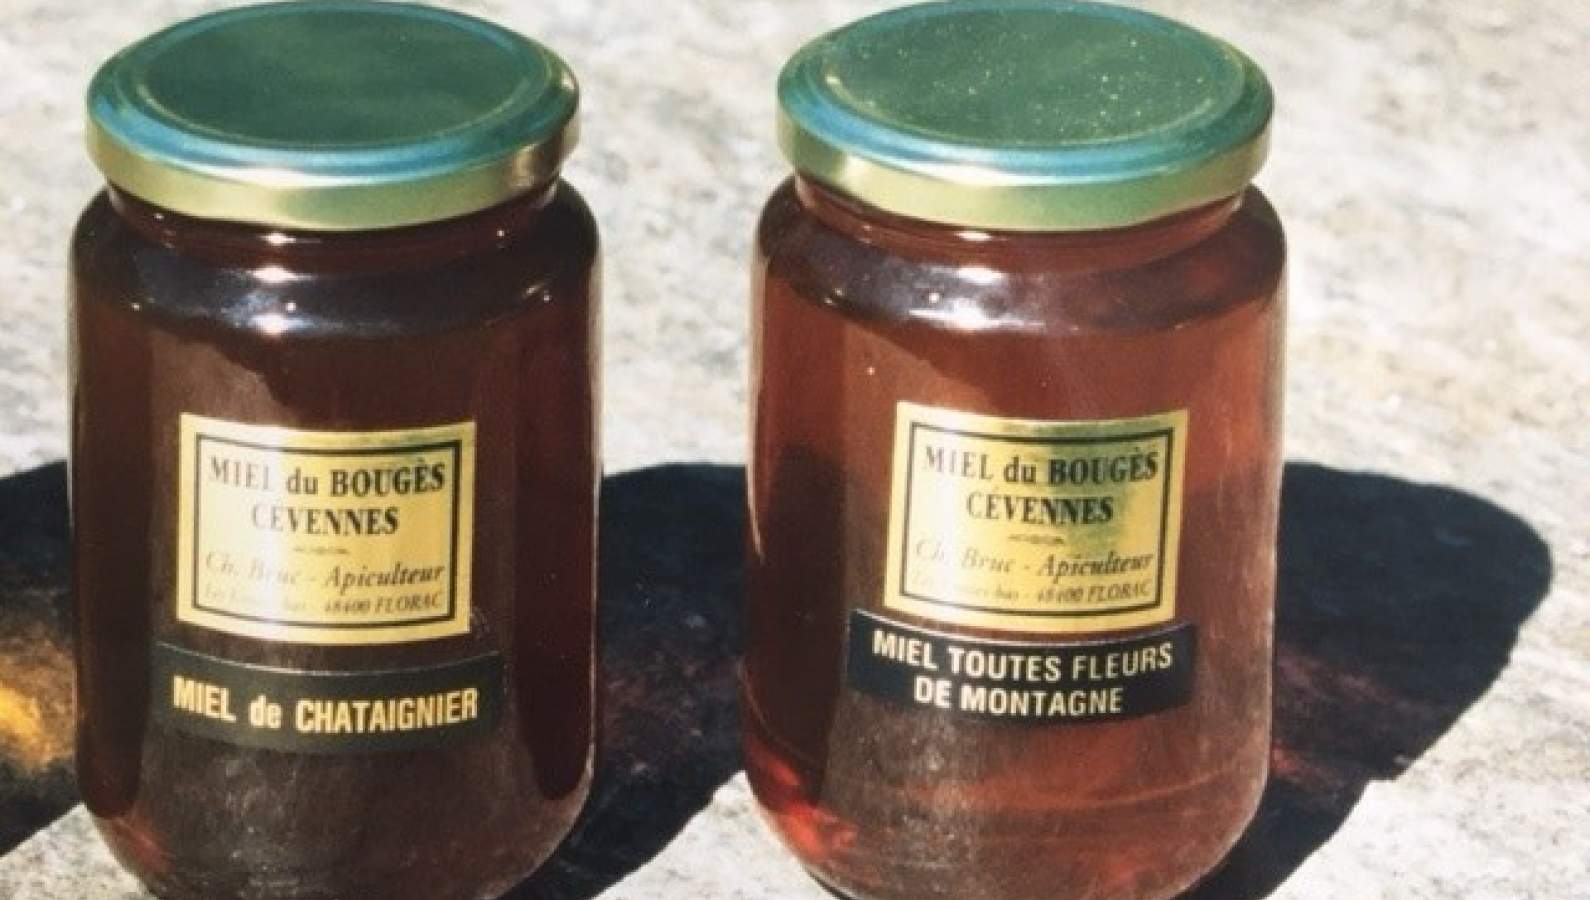 Honey from the slopes of Mont Bougès